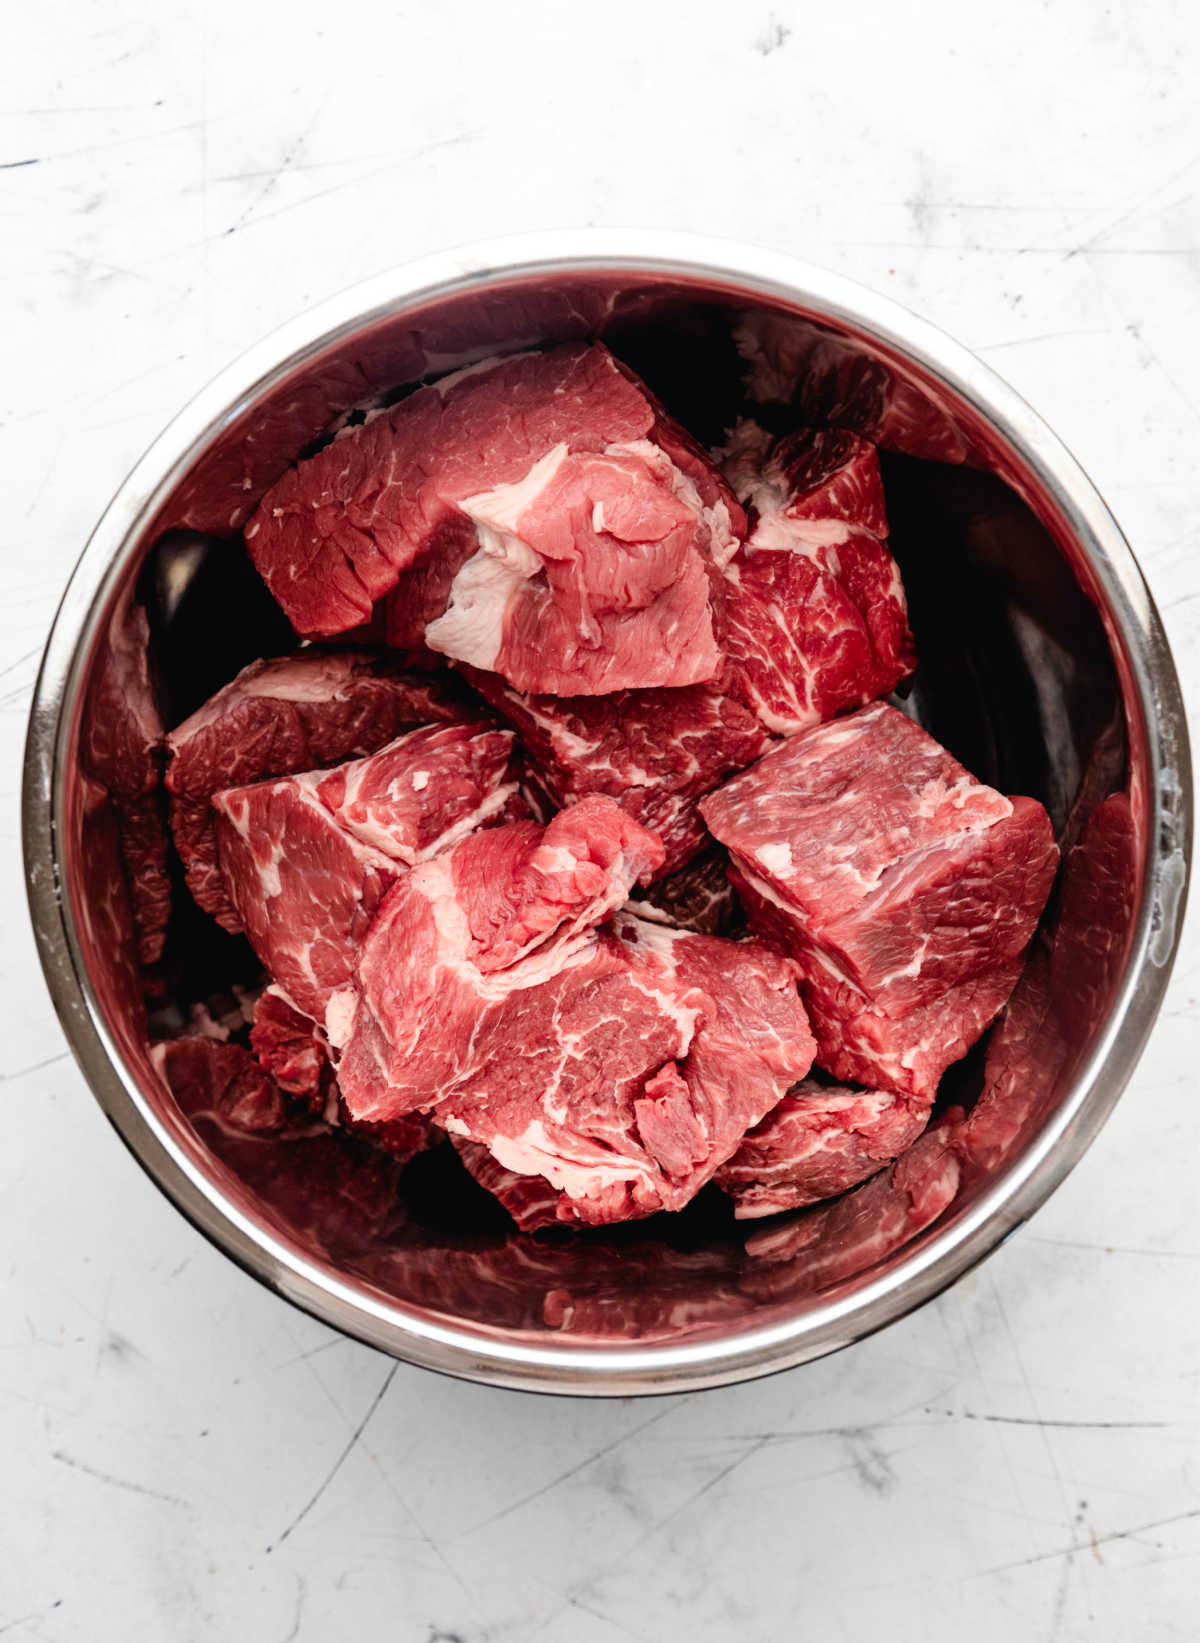 Pieces of chuck roast in an instant pot.